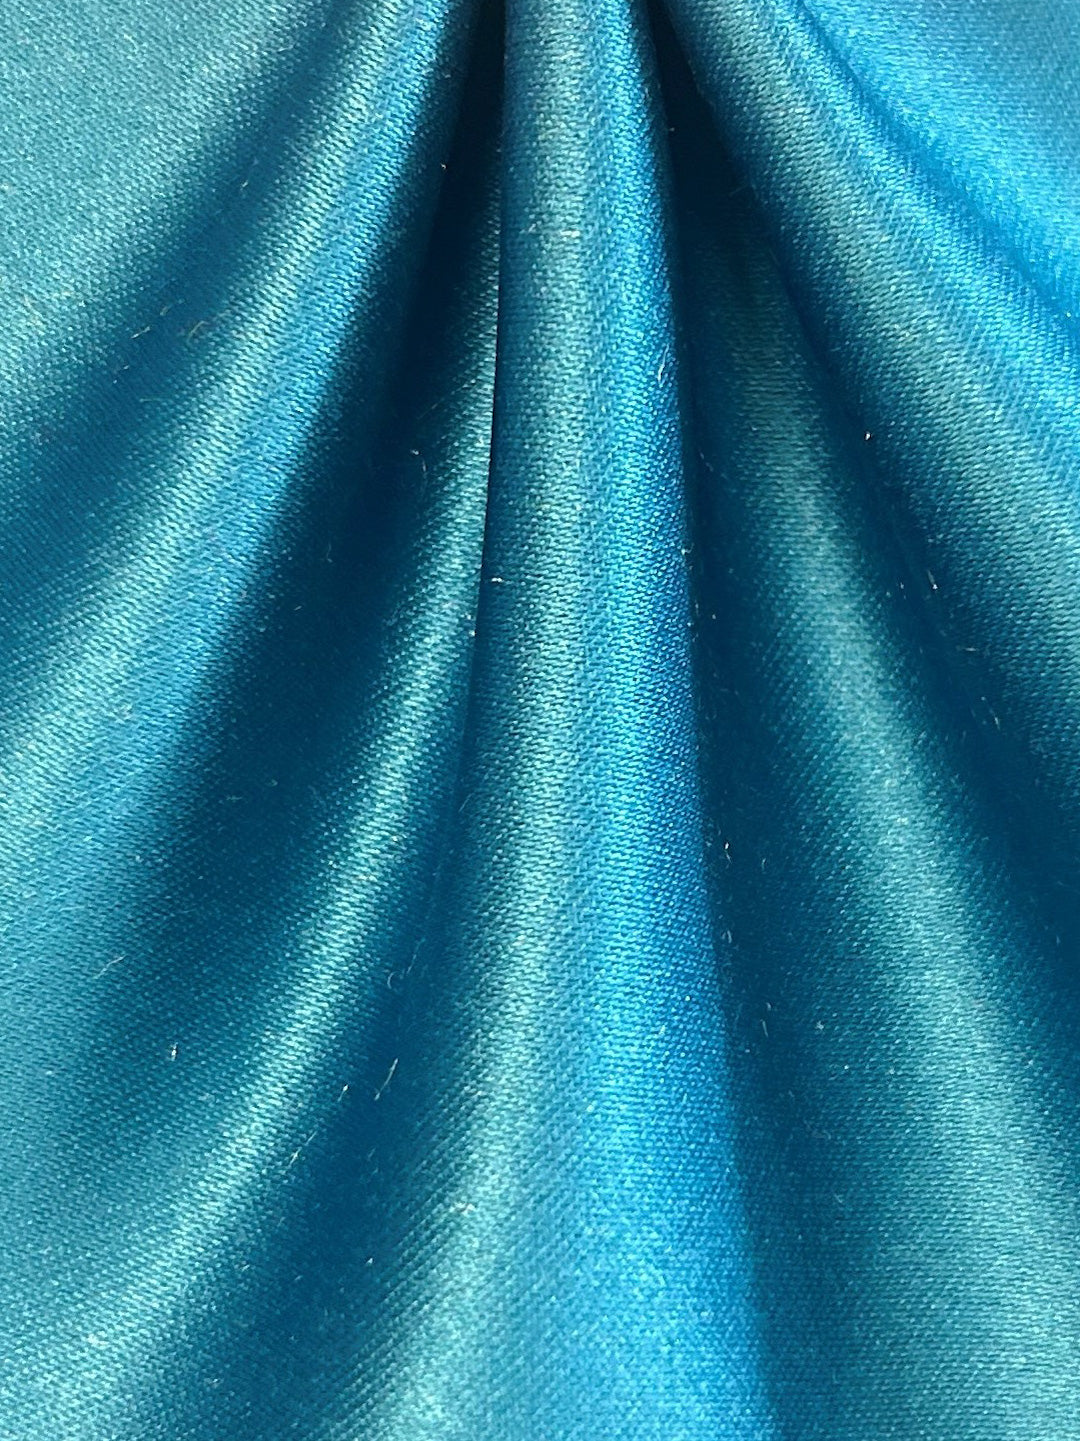 Teal Polyester Satin - Majestic